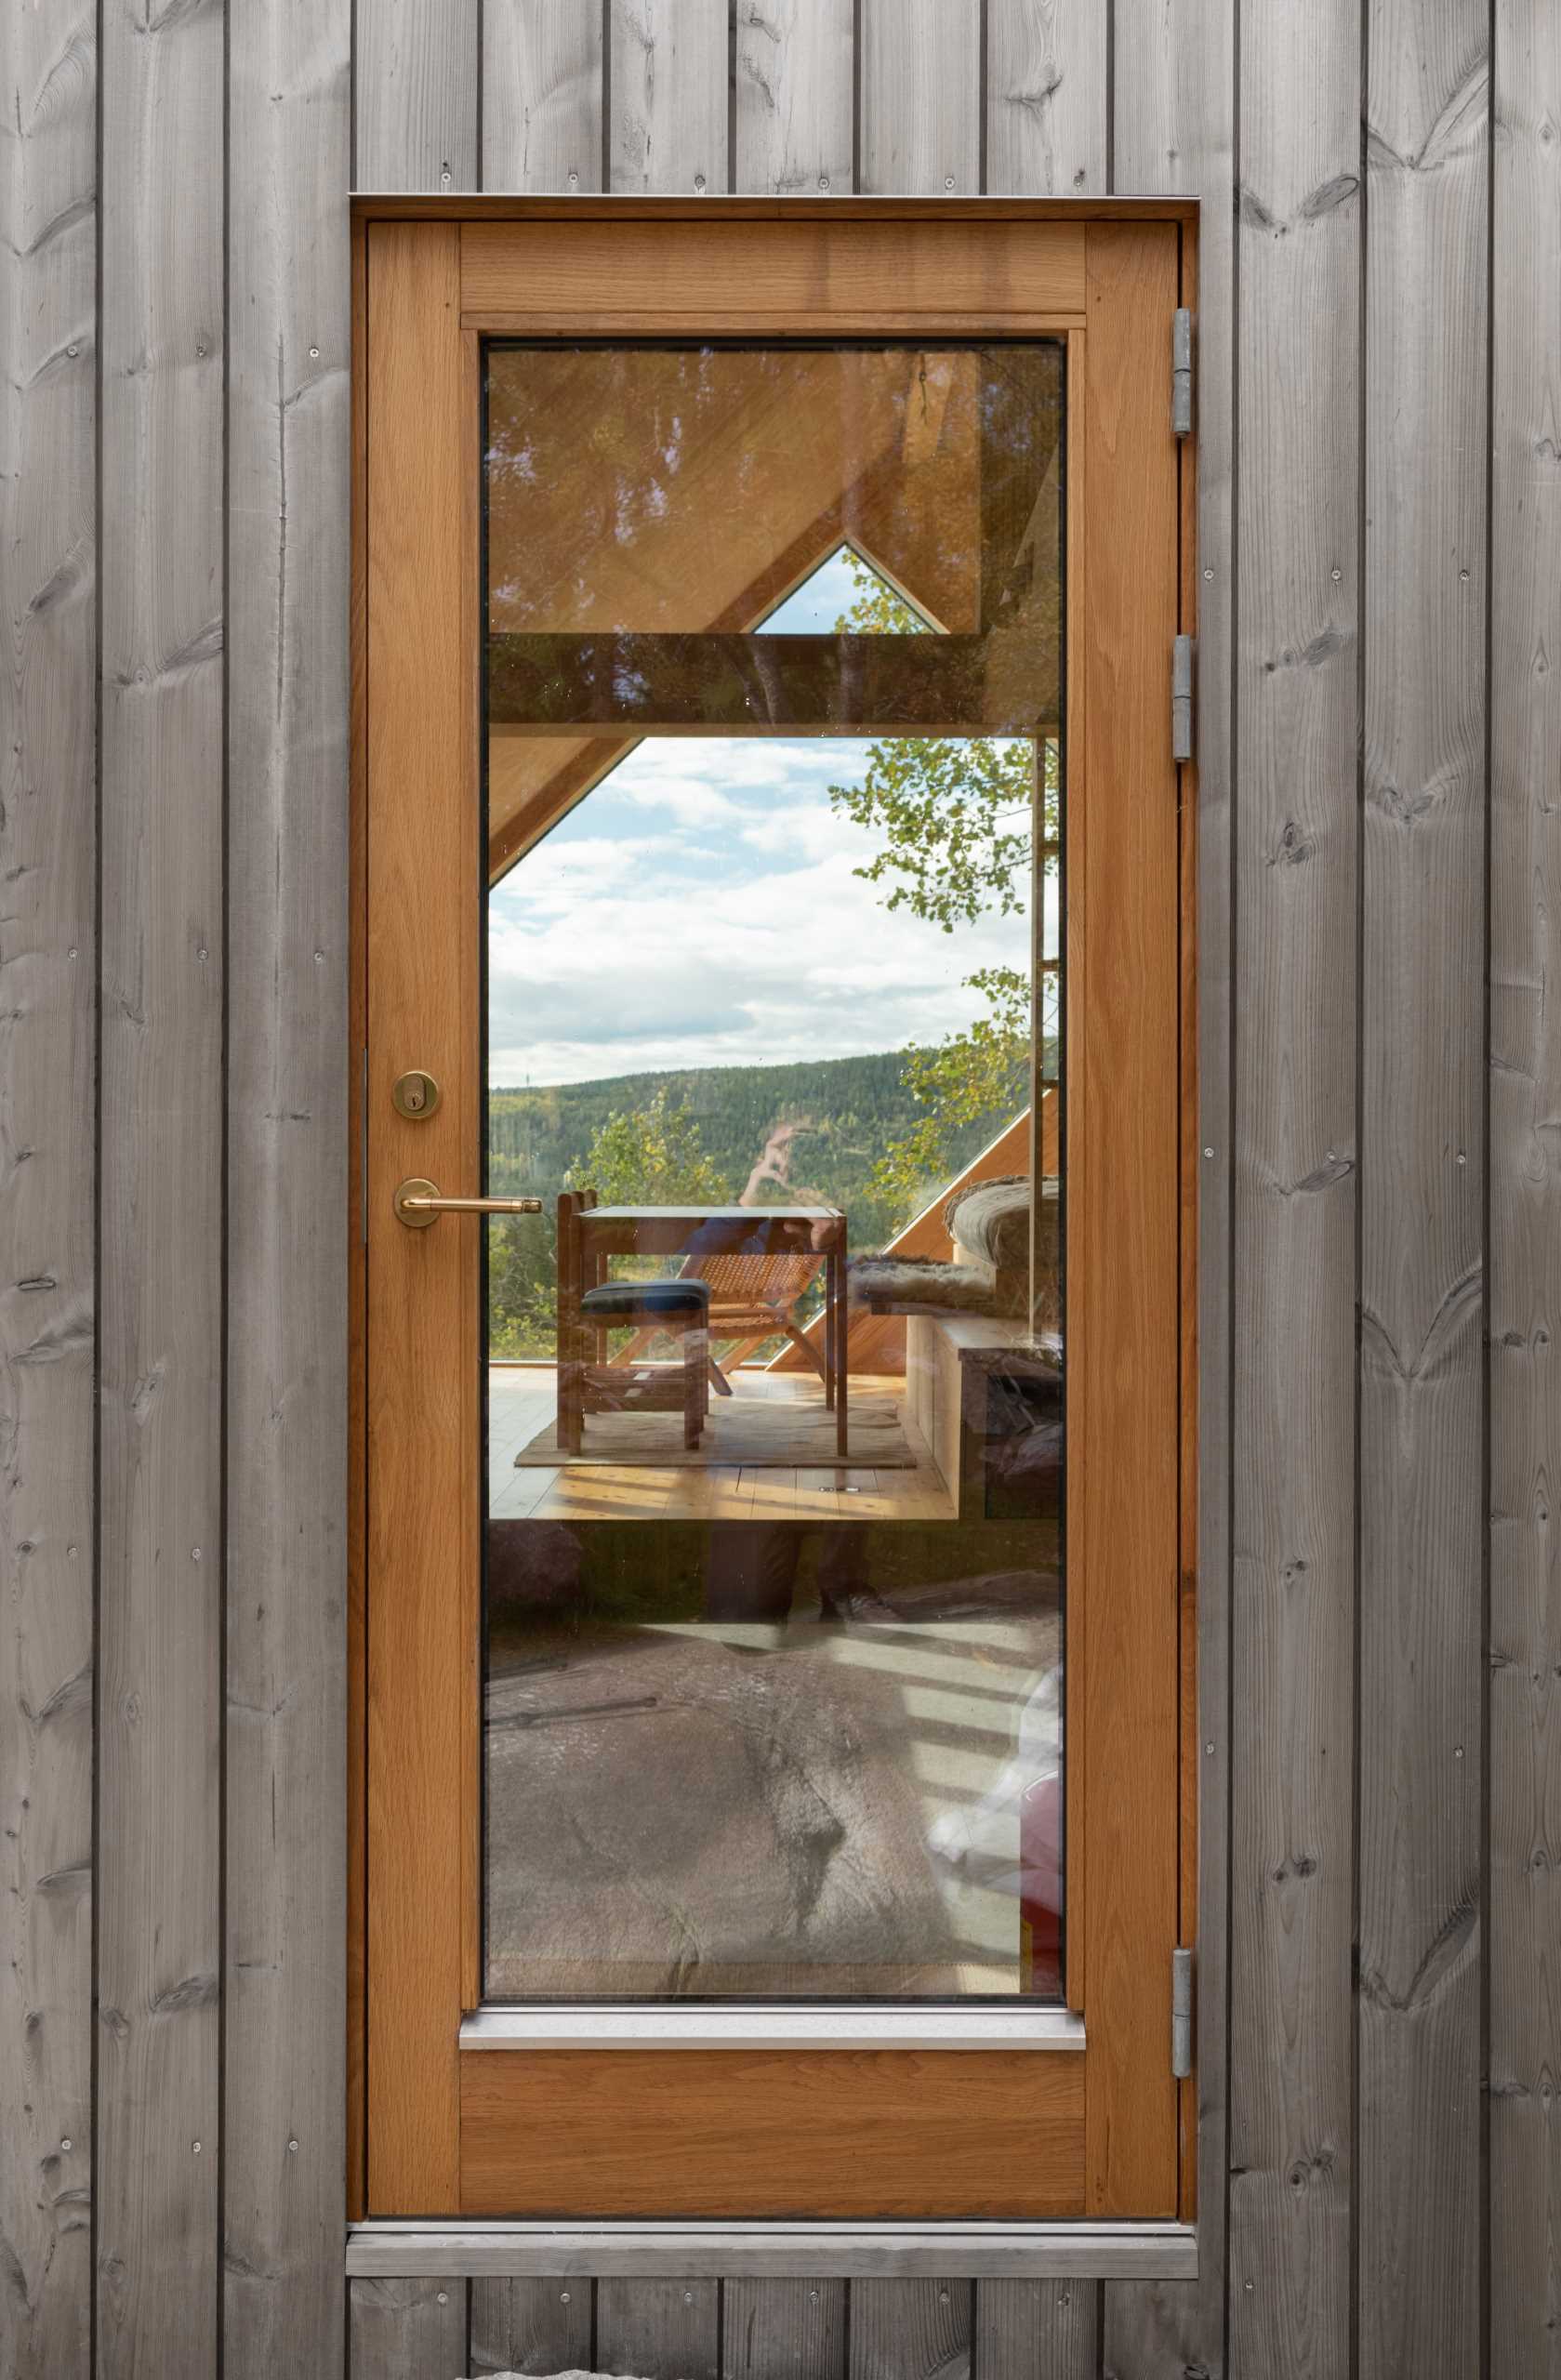 The wood-framed glass door of a contemporary cabin.